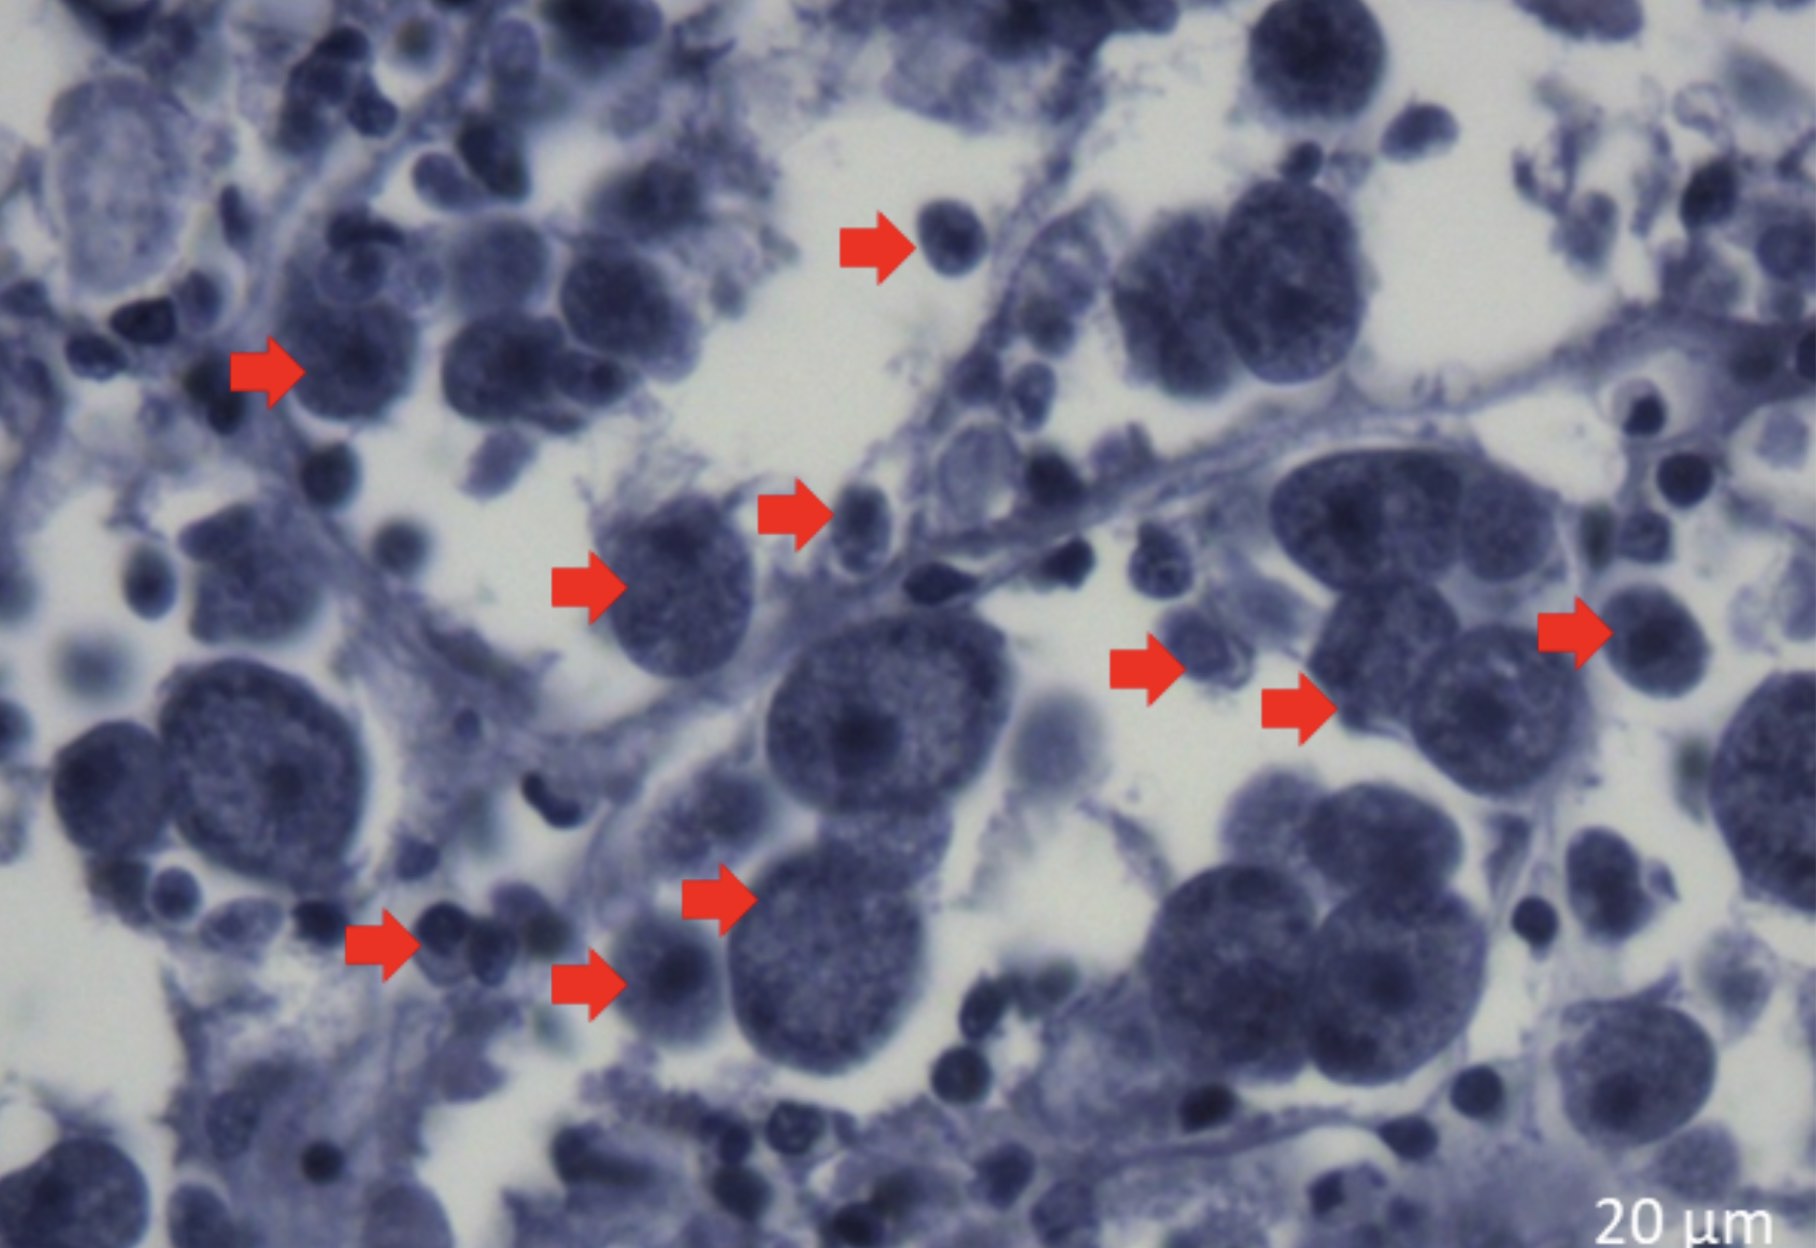 Microscopic image of oval shaped parasite cells marked with red arrows